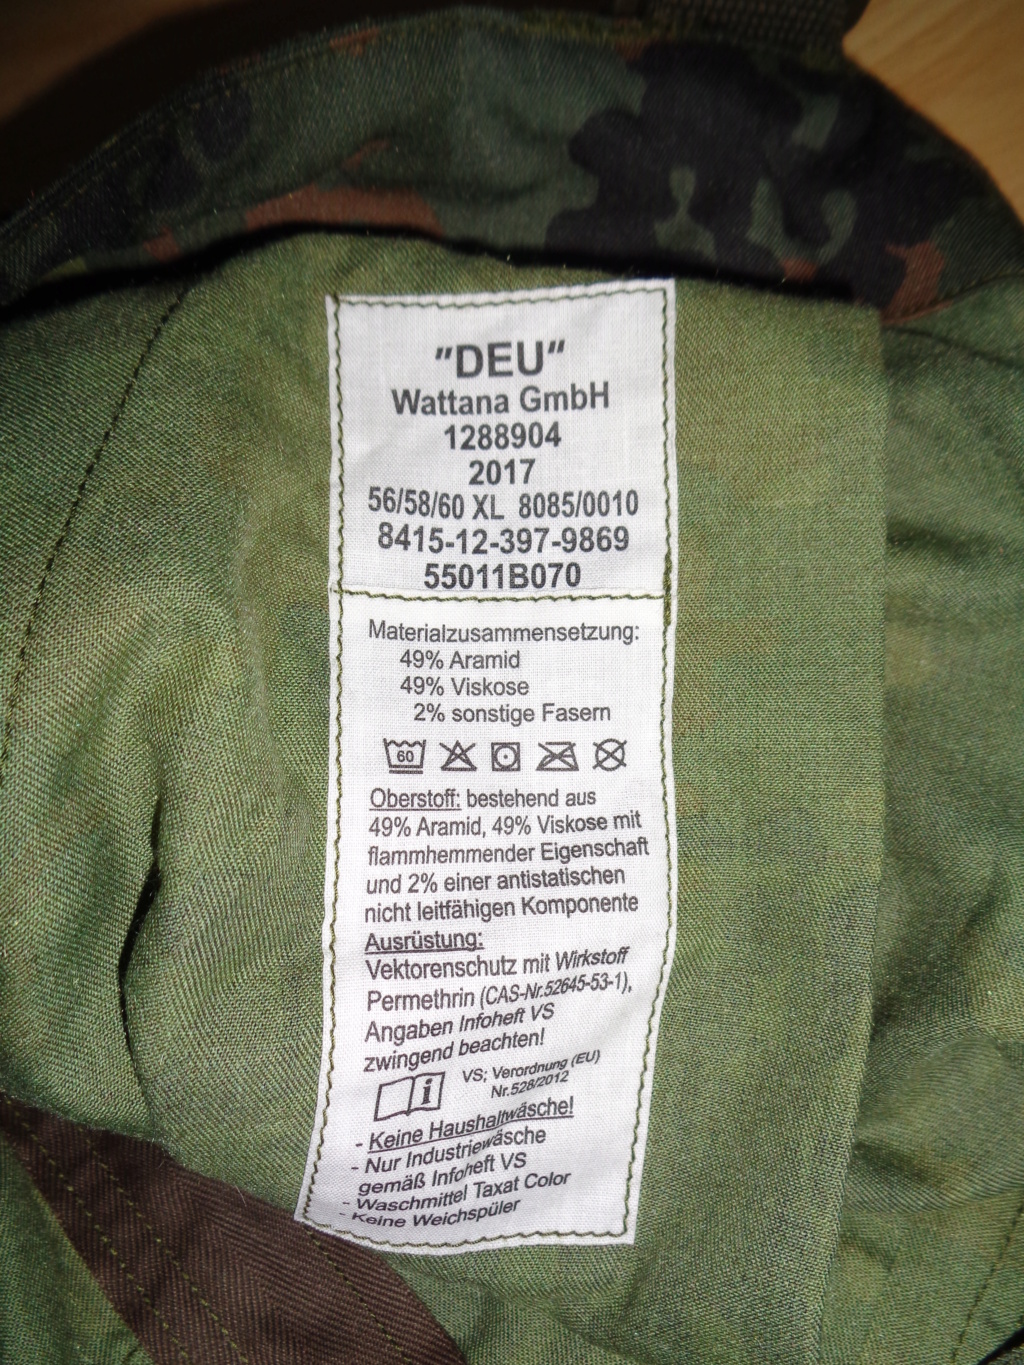 German sniper clothing and concealment items Dsc08116